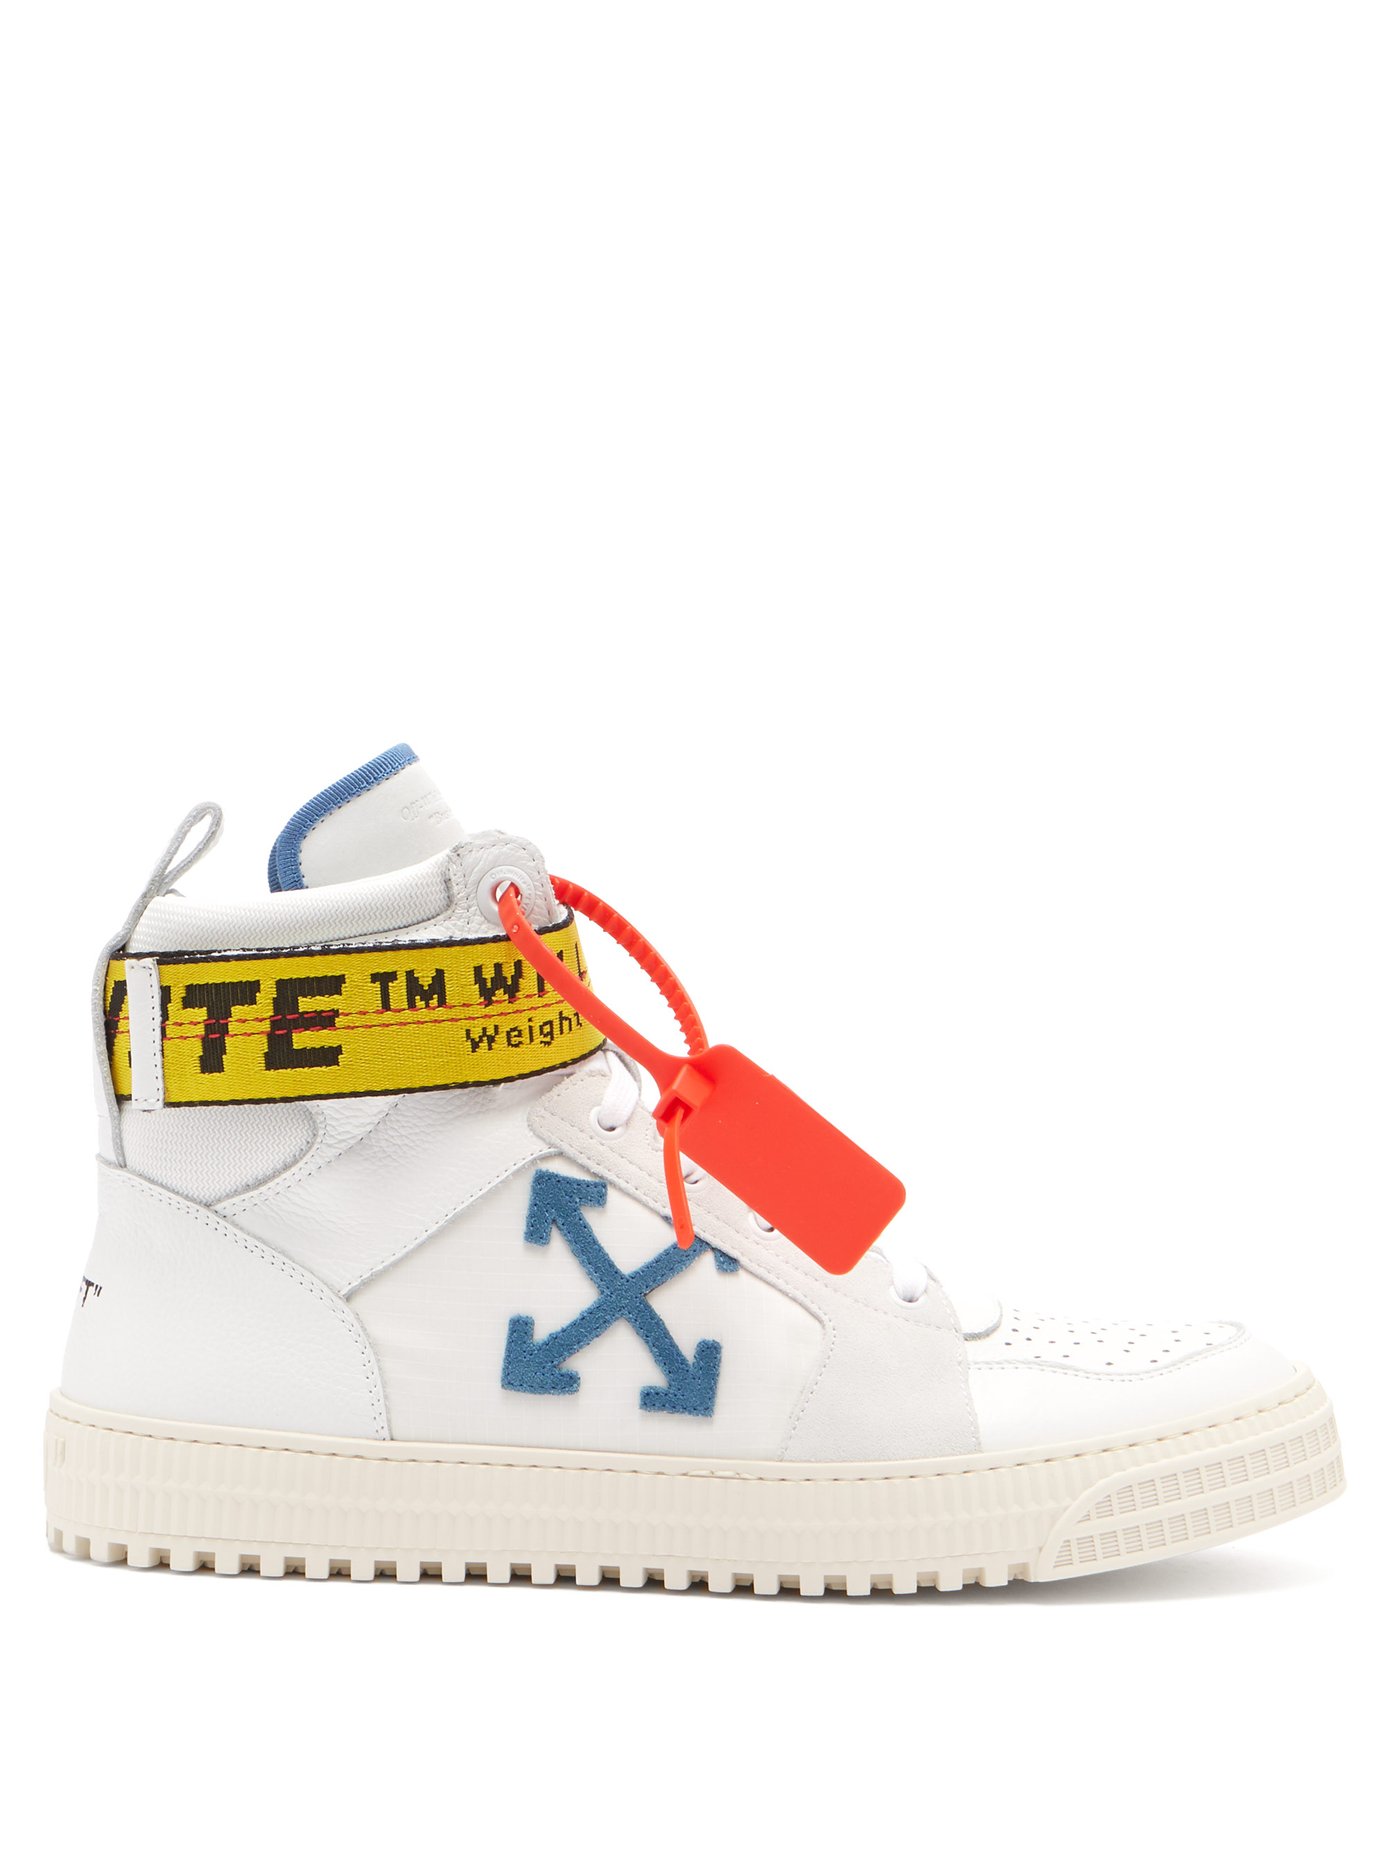 off white industrial high top